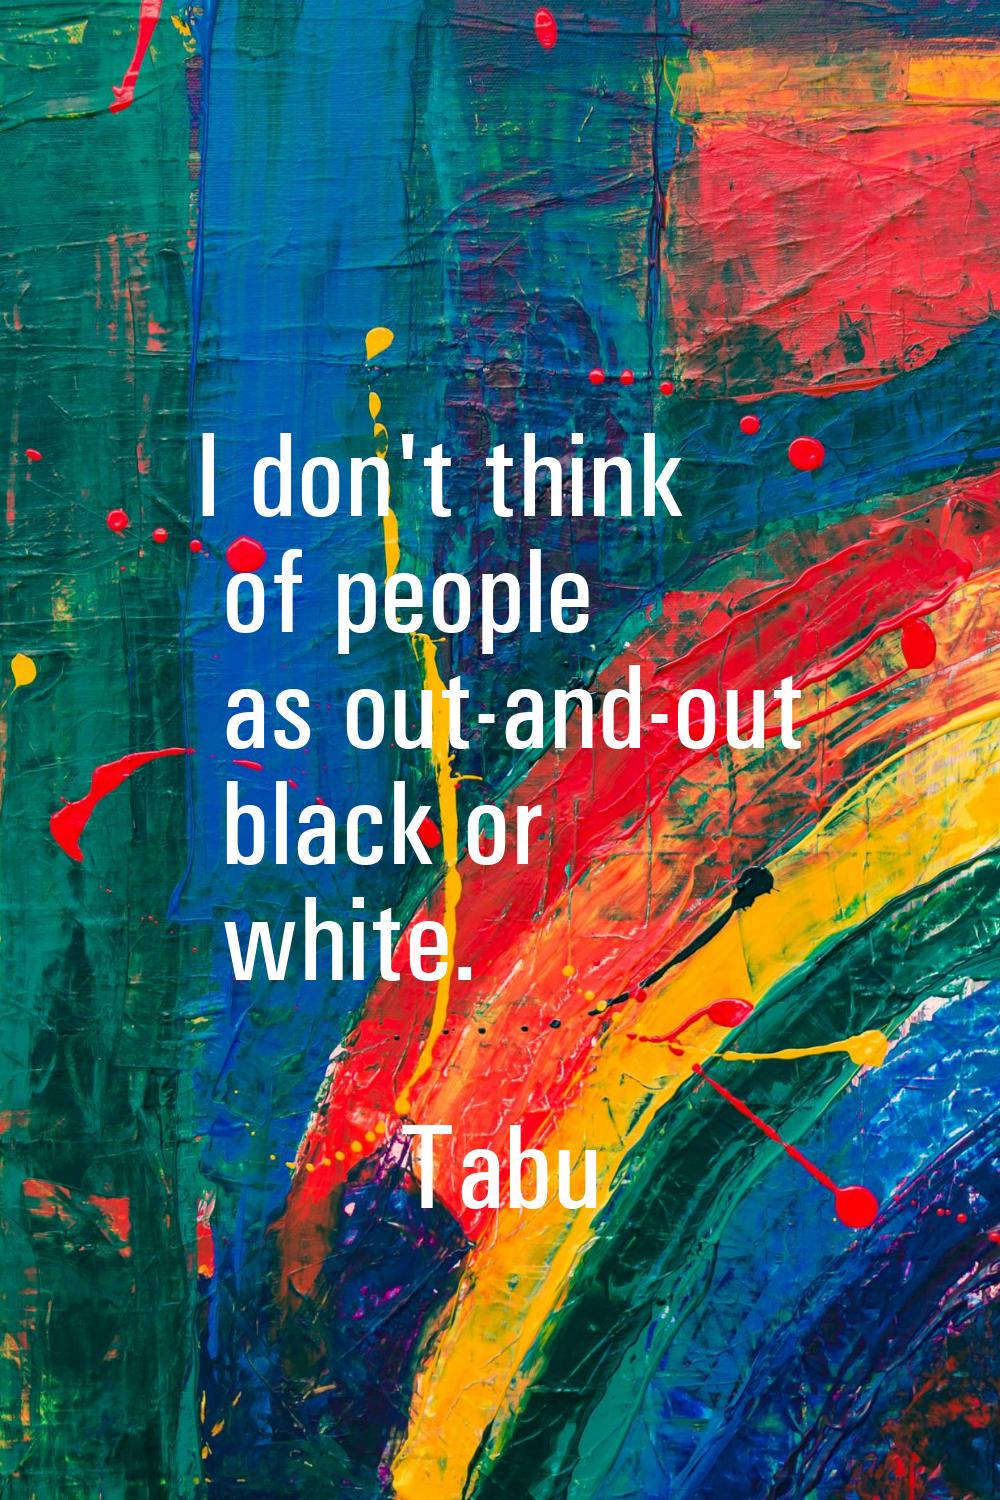 I don't think of people as out-and-out black or white.